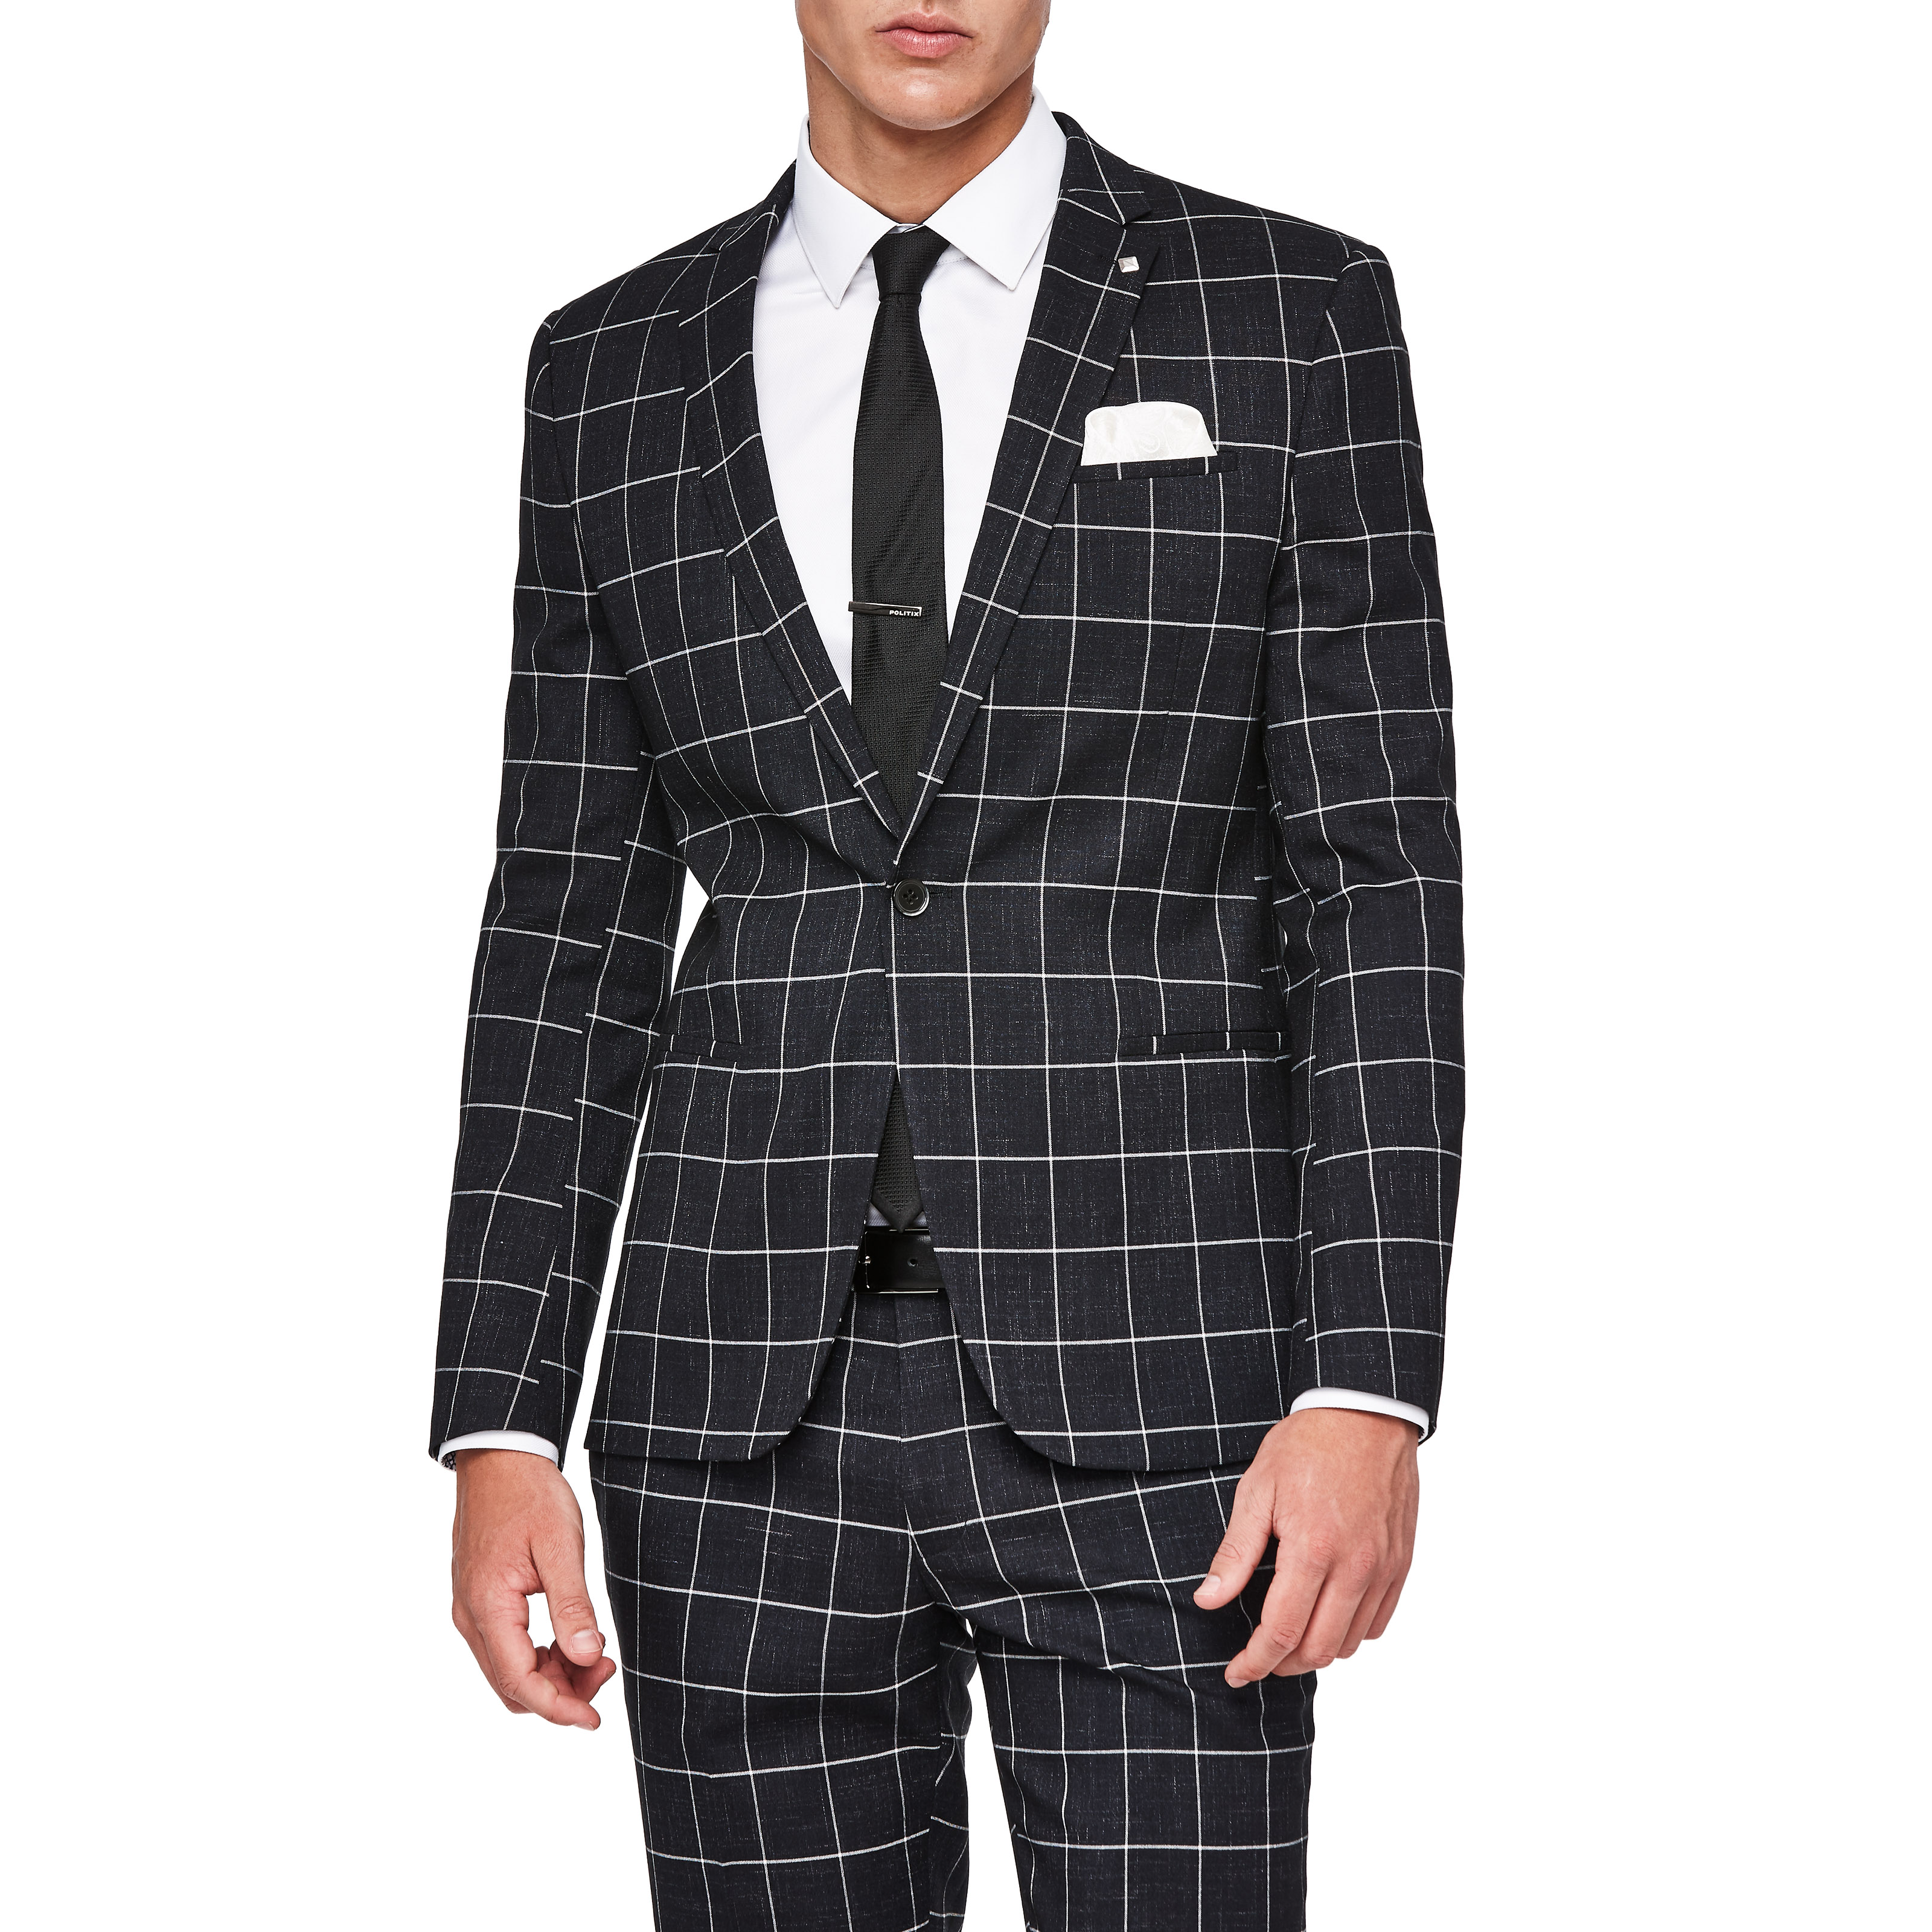 black and white formal suit